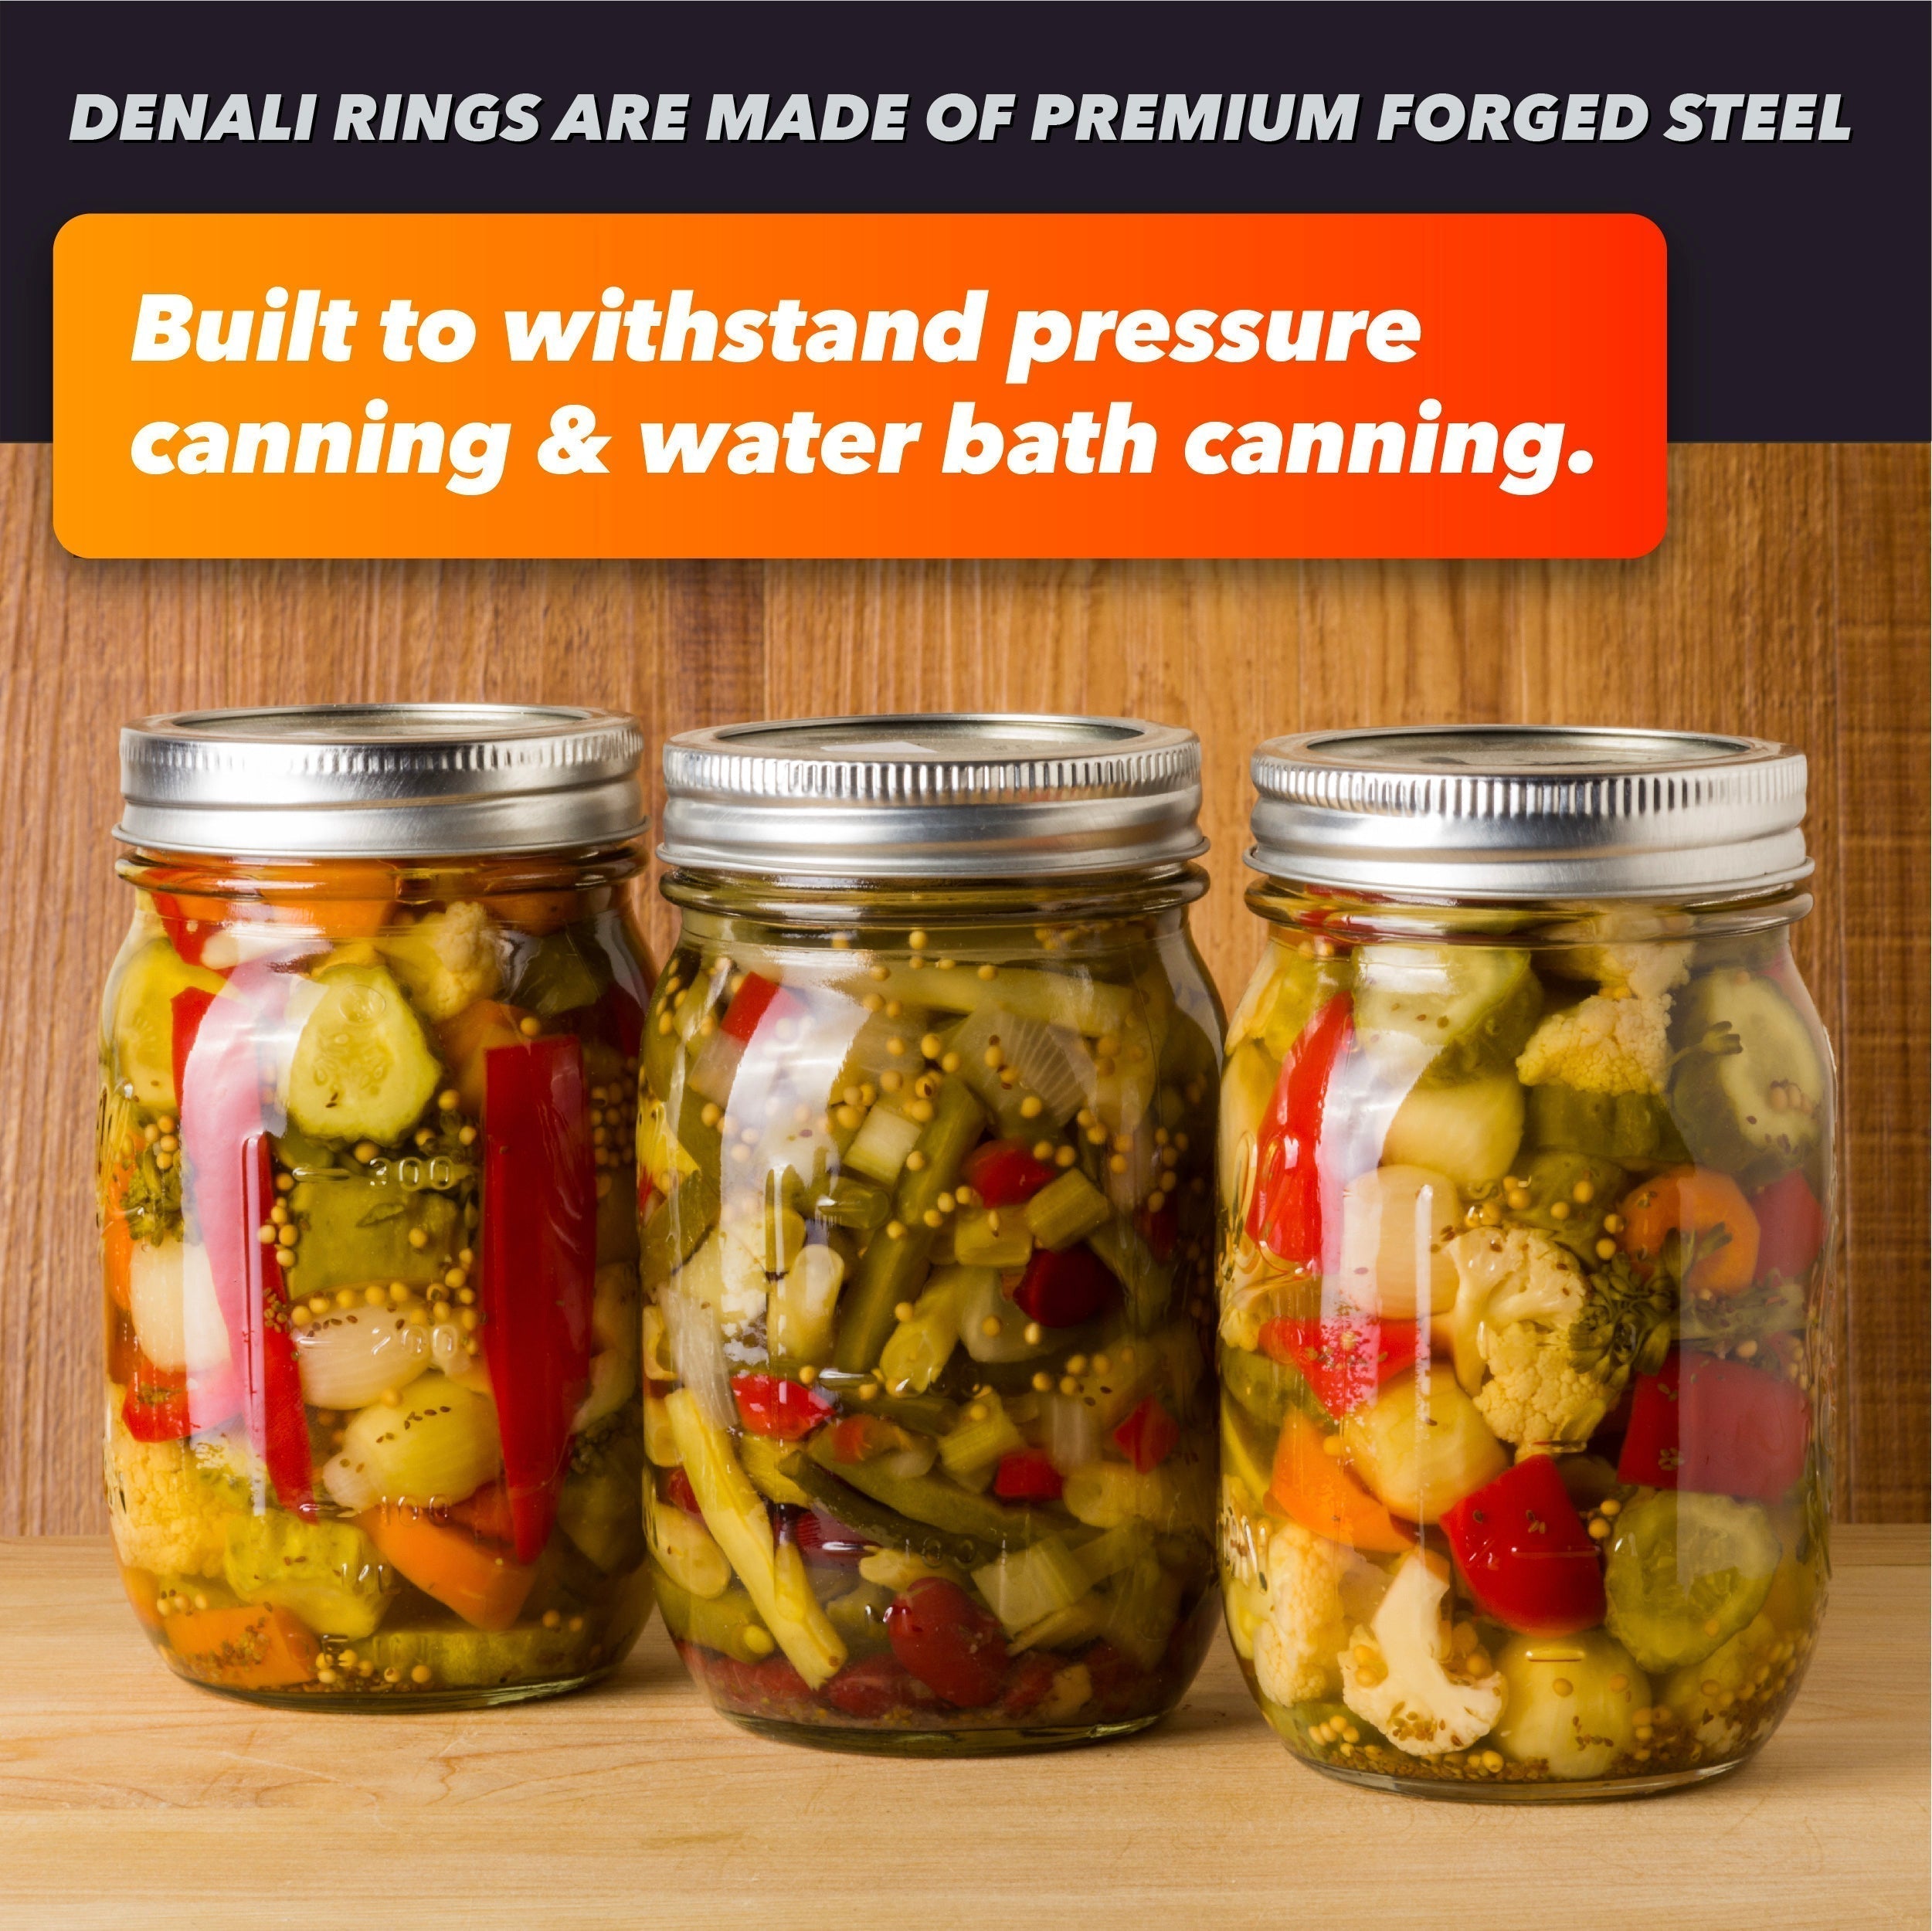 Forged steel rings useful for pressure and water bath canning